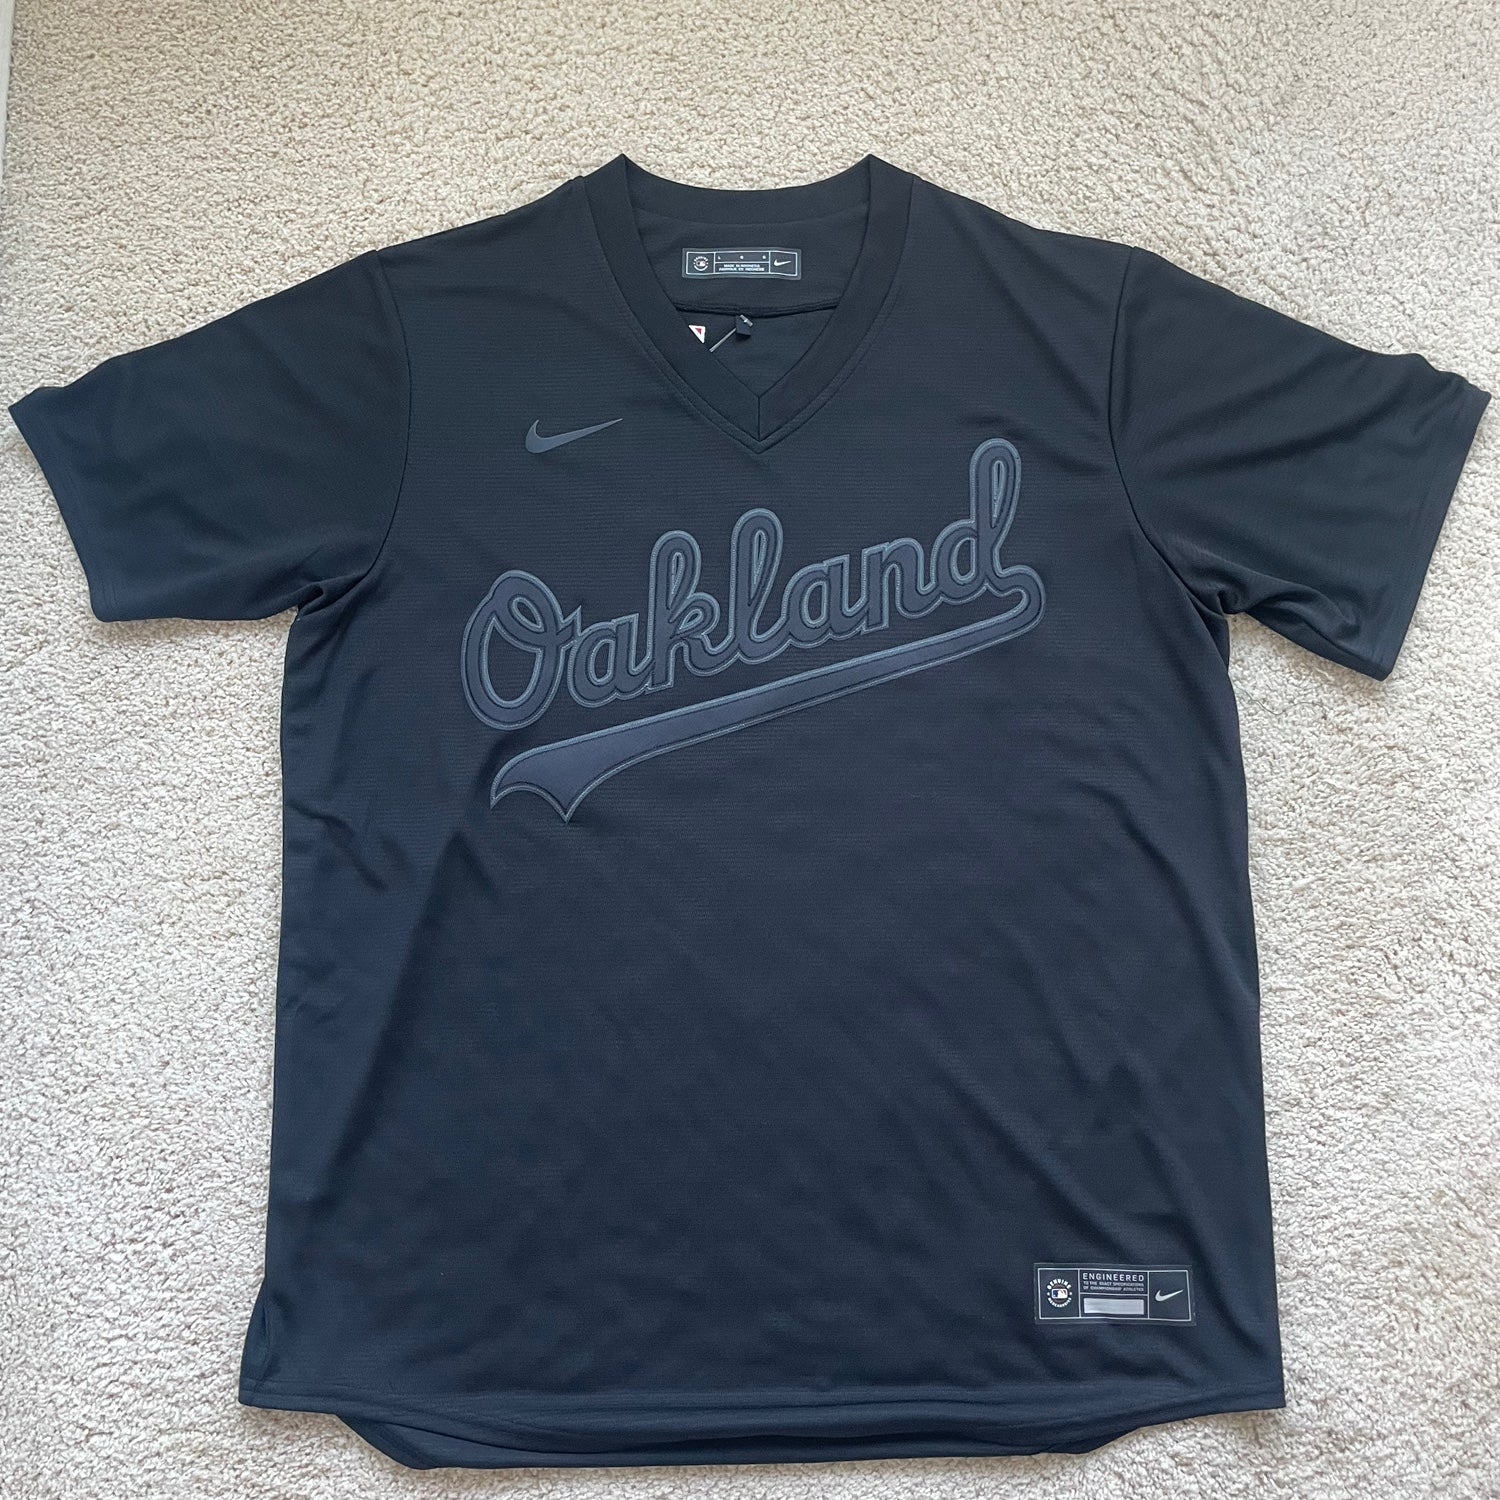 Nike Jerseys Have Arrived, They're here. Swoosh there it is. www.athletics.com/shop, By Oakland Athletics